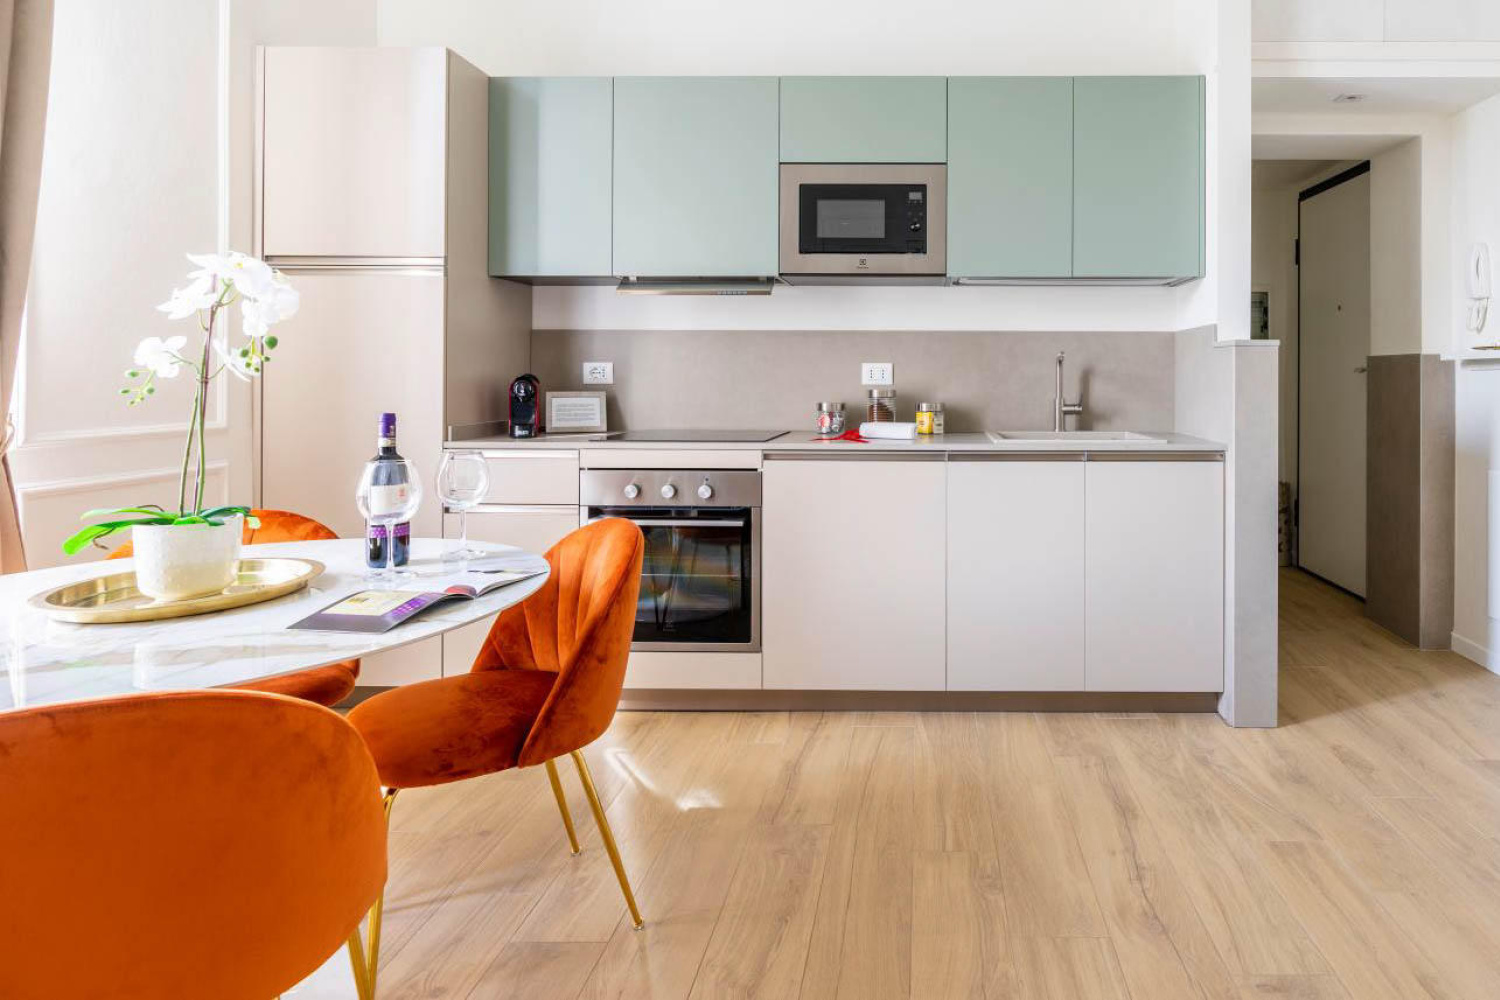 FLORENCE FEEL APARTMENTS IN FLORENZ - IBFOR - Your design shop